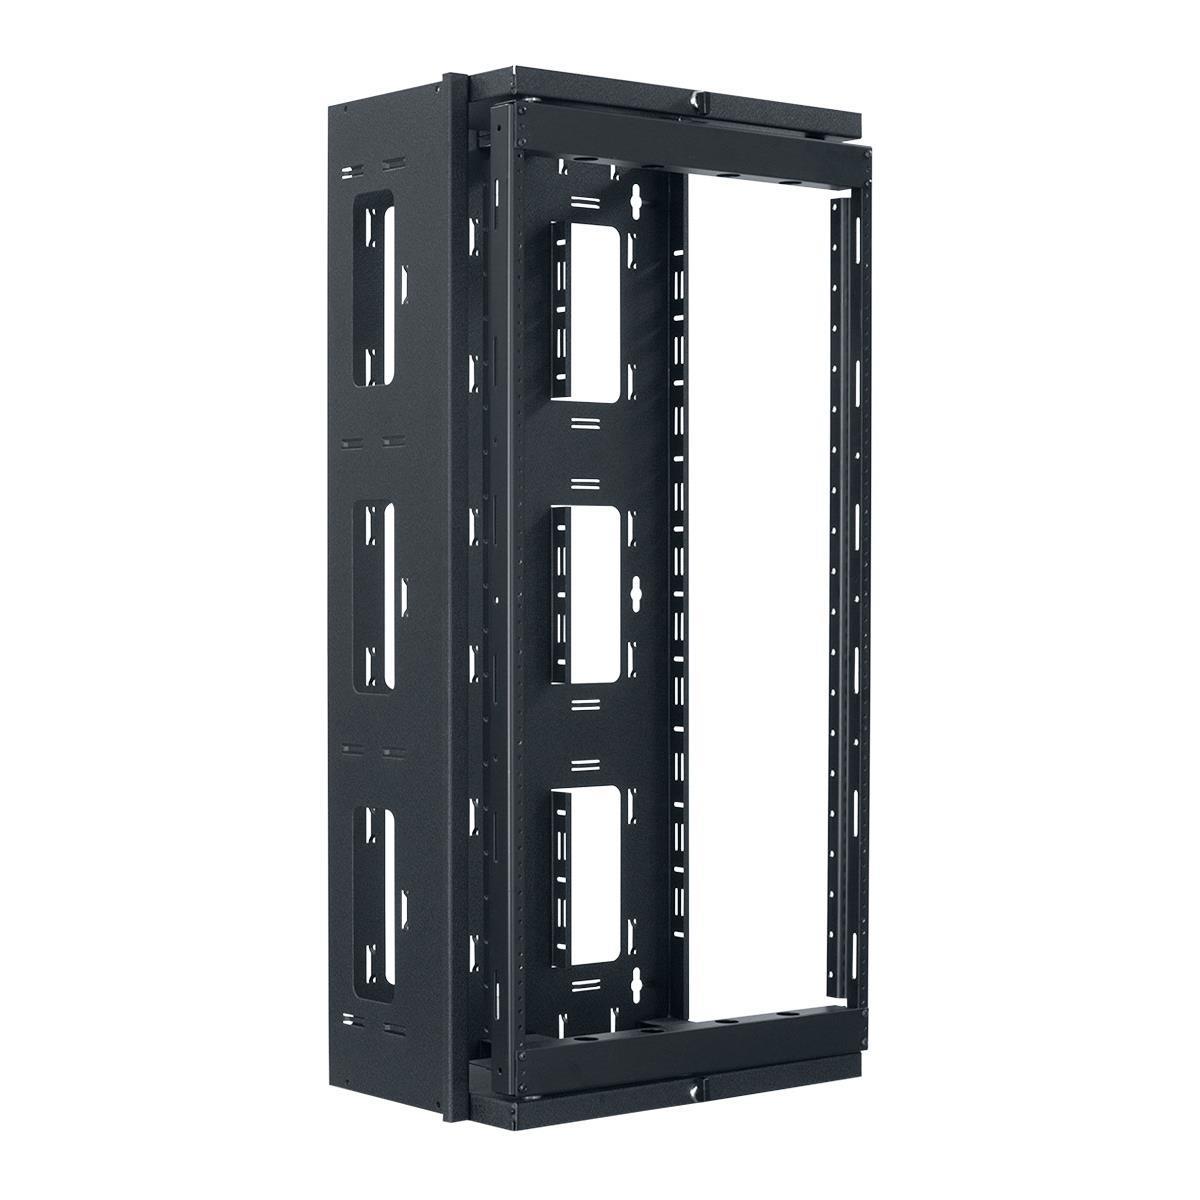 Image of Lowell Manufacturing SGR-2012 20U Swing-Gate Open Frame Rack